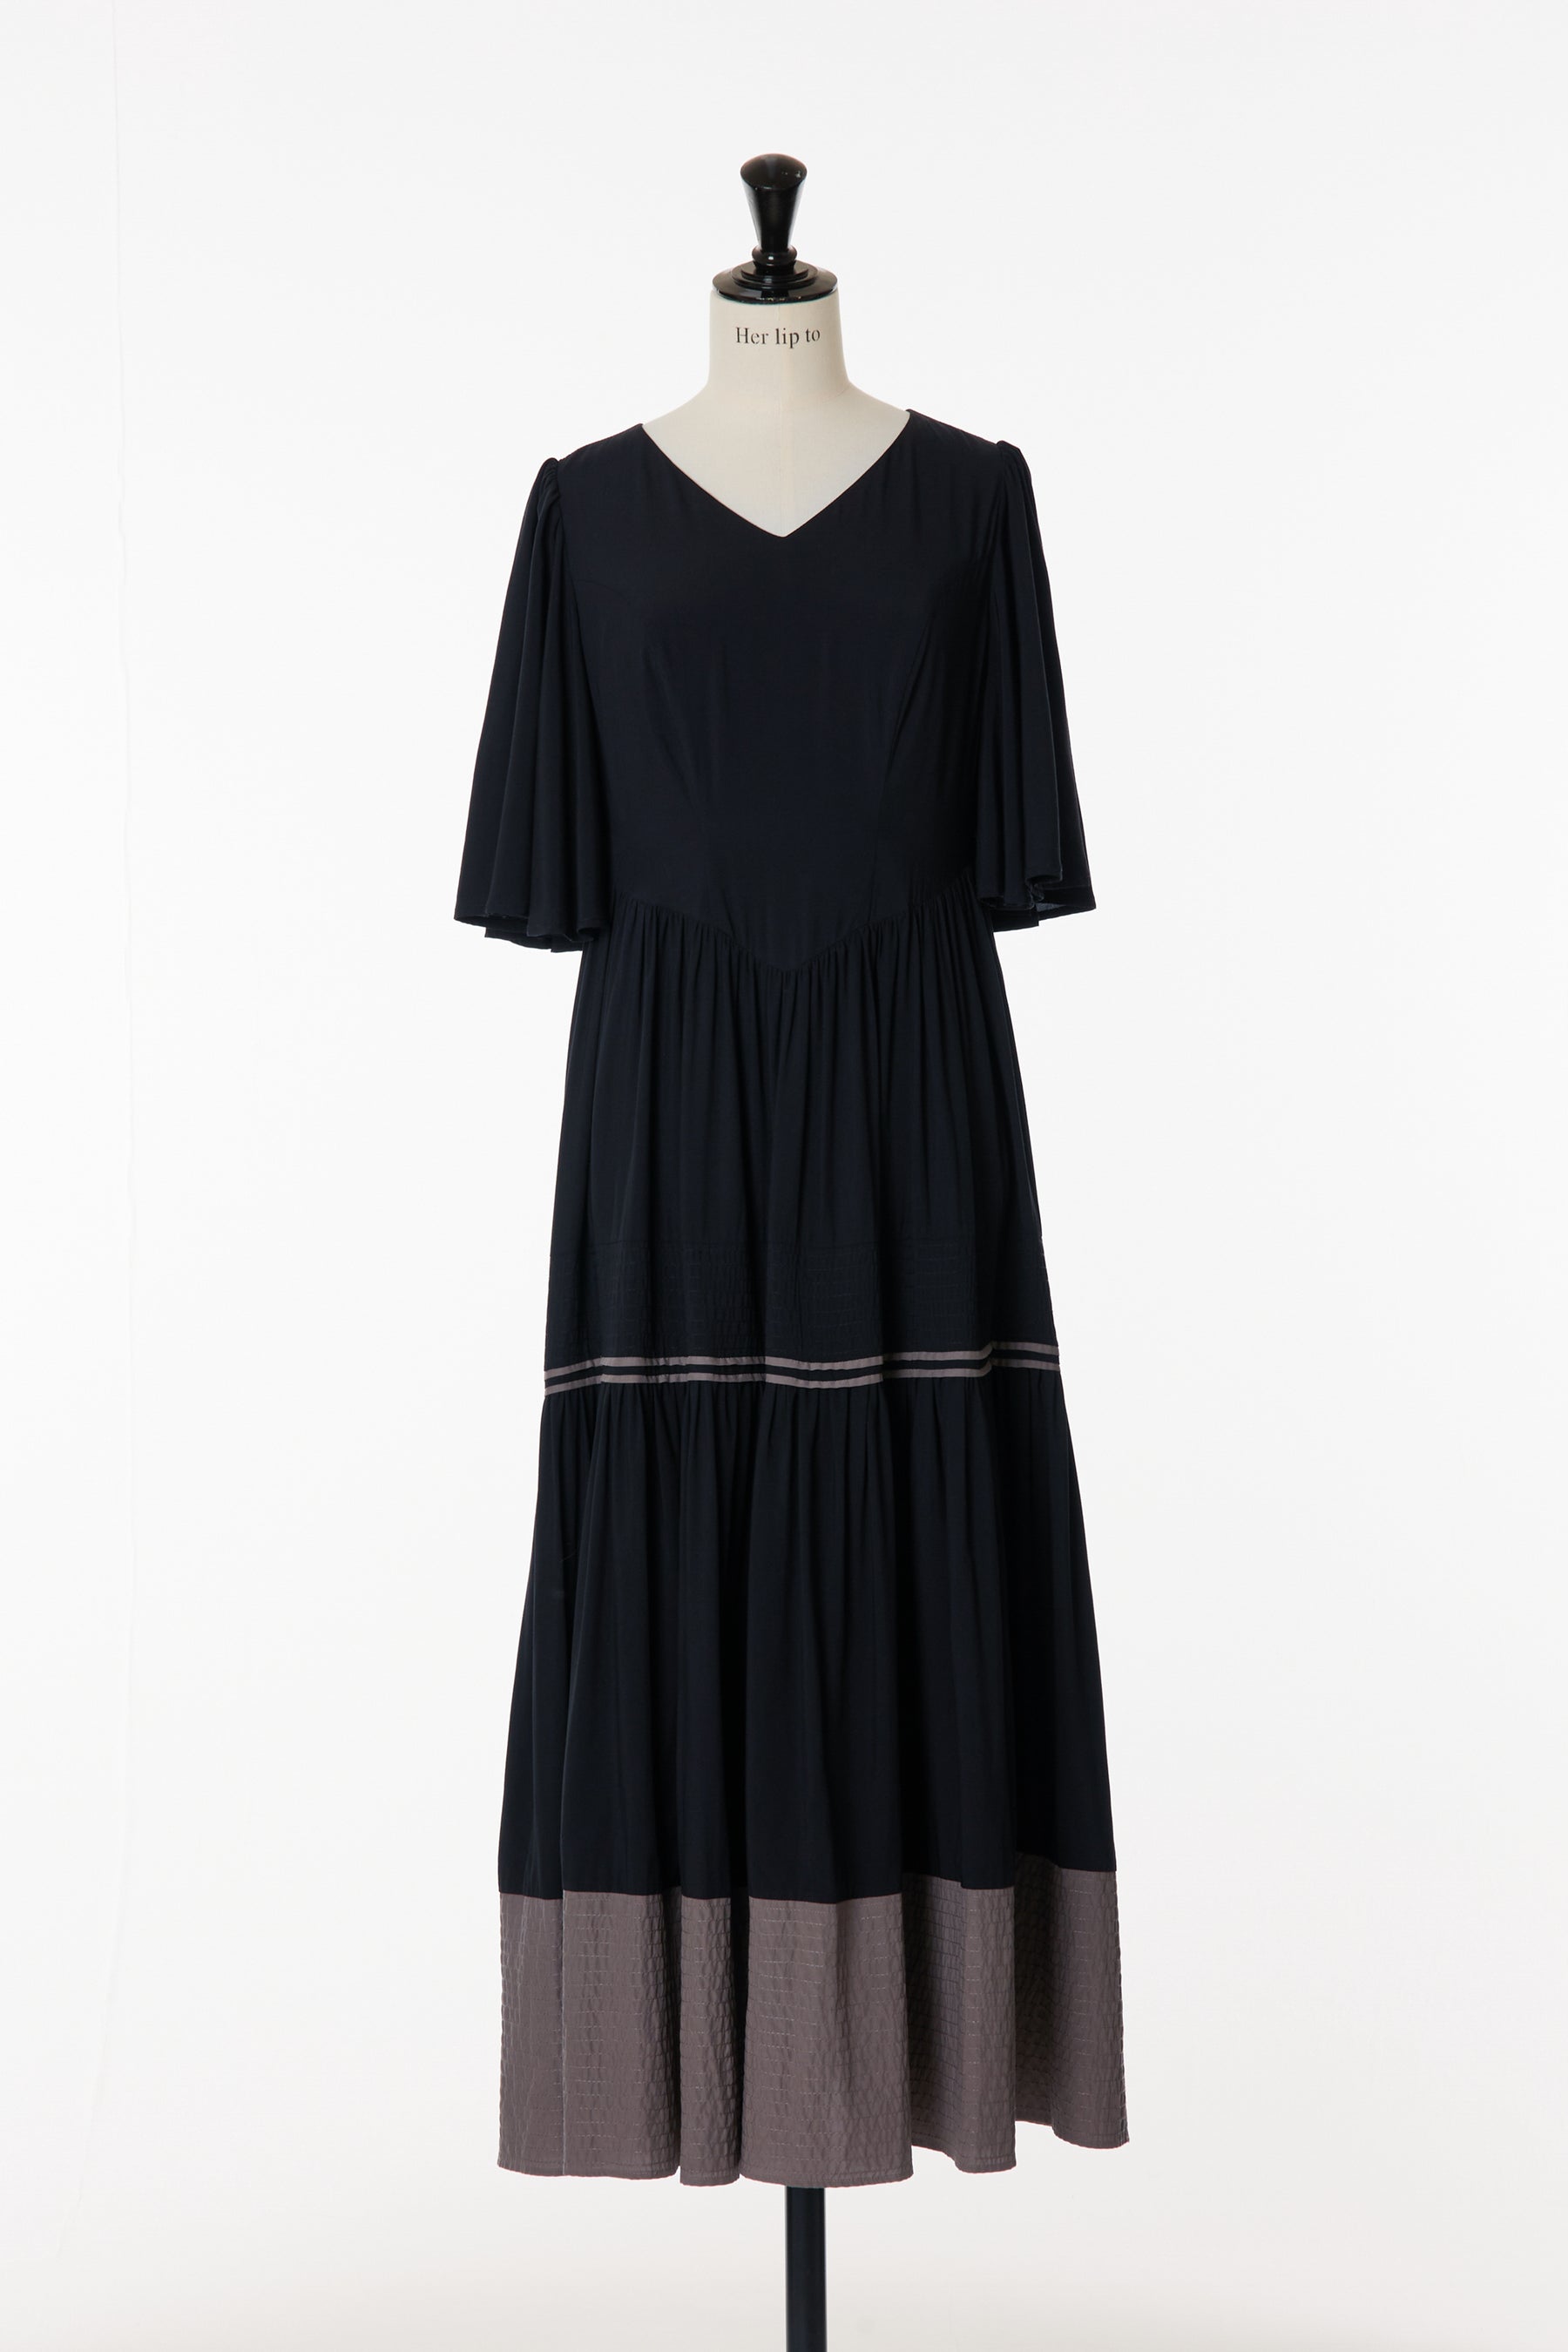 Her lip to Montpellier Bell-Sleeve Dress